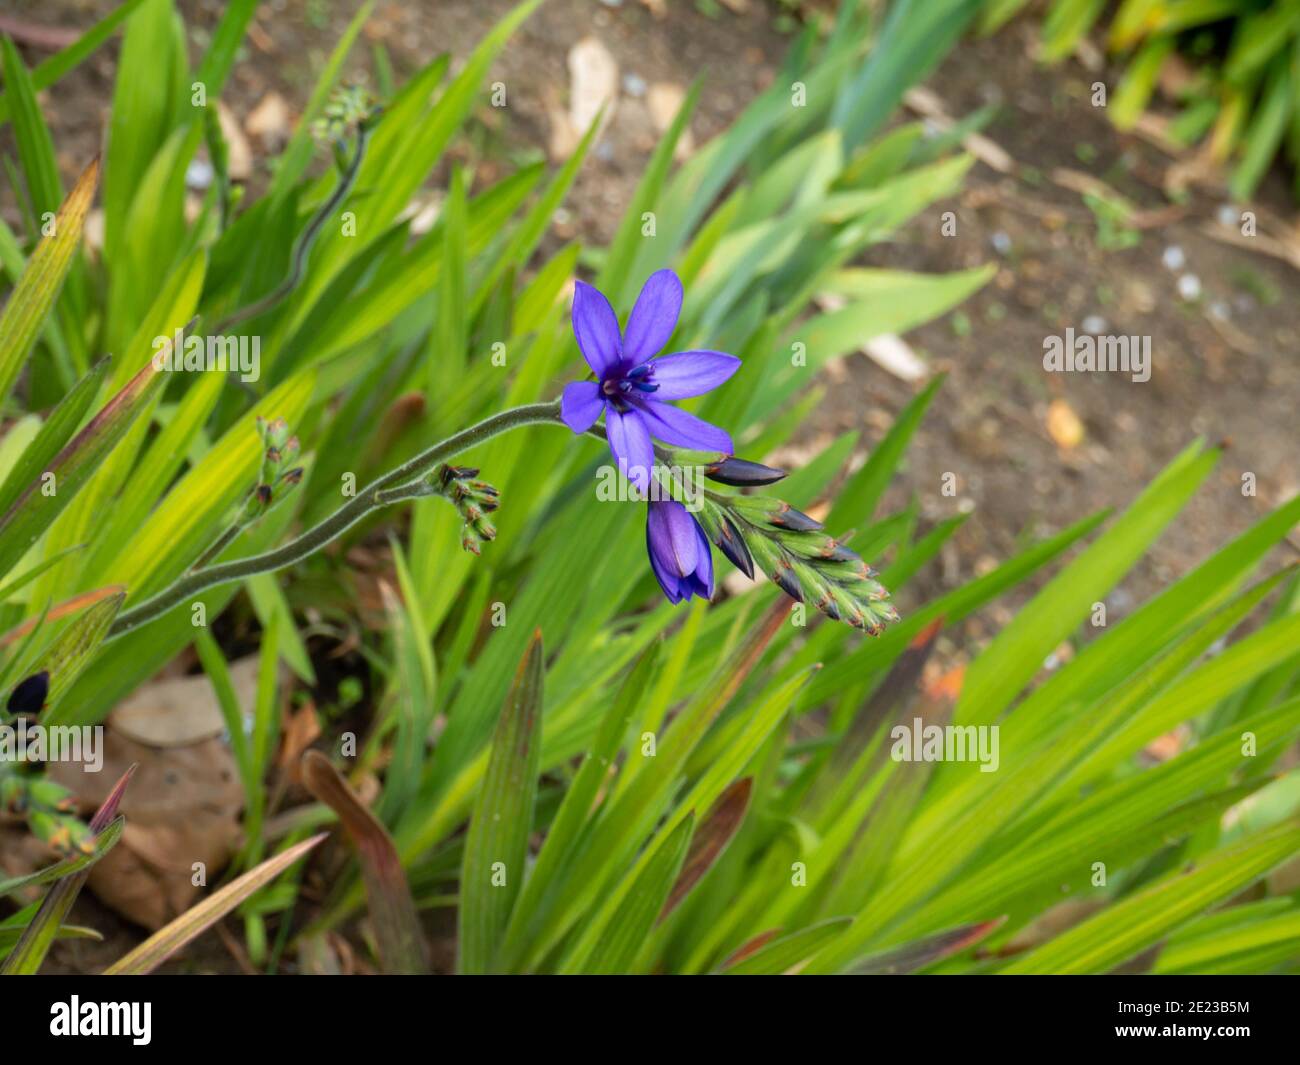 Babiana stricta or Blue freesia or Baboon flowers, leaves and buds in the garden Stock Photo